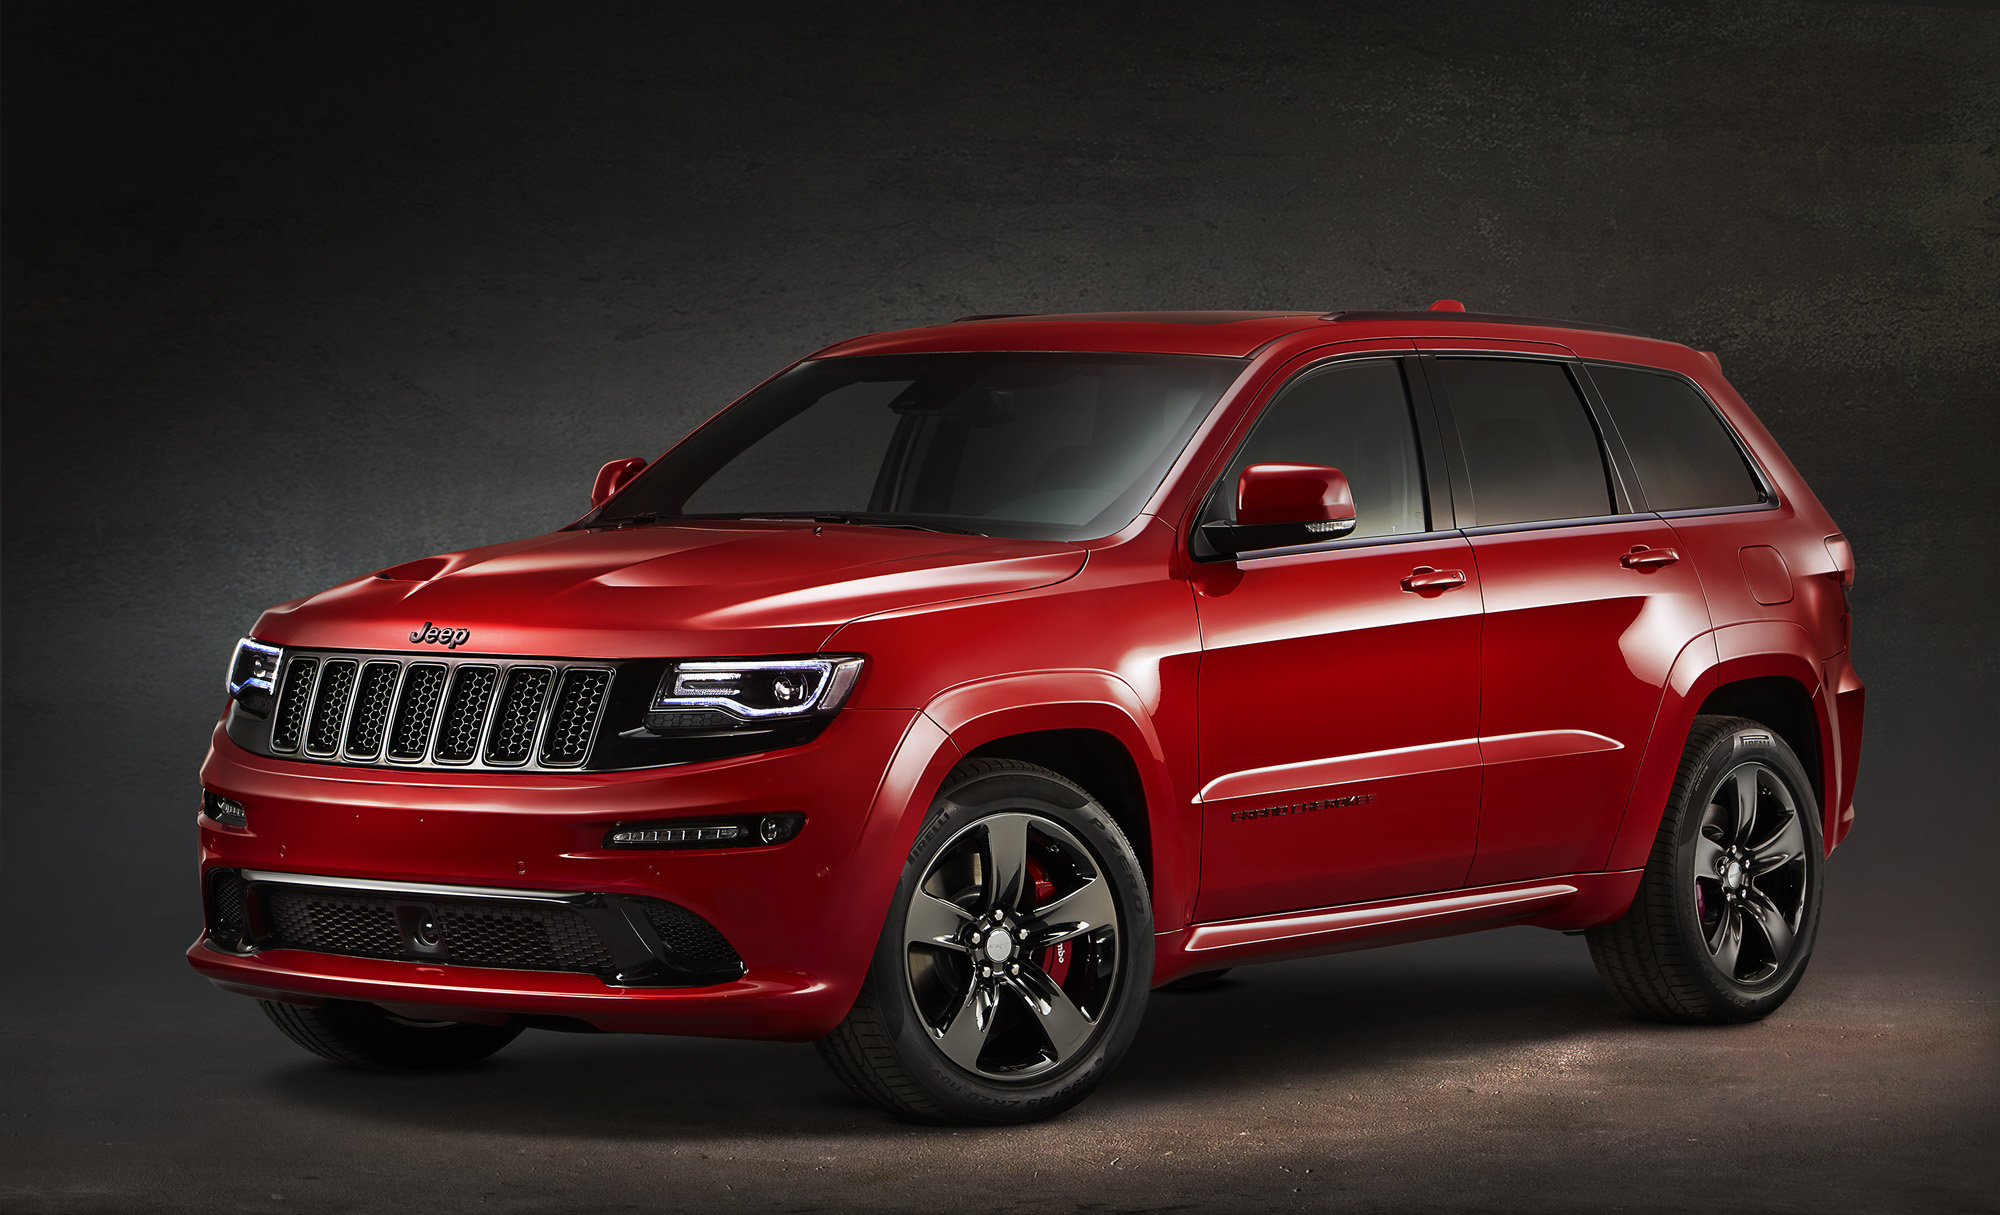 Jeep® Grand Cherokee SRT Red Vapor Special Edition makes its European debut at the 2014 Paris Motor Show